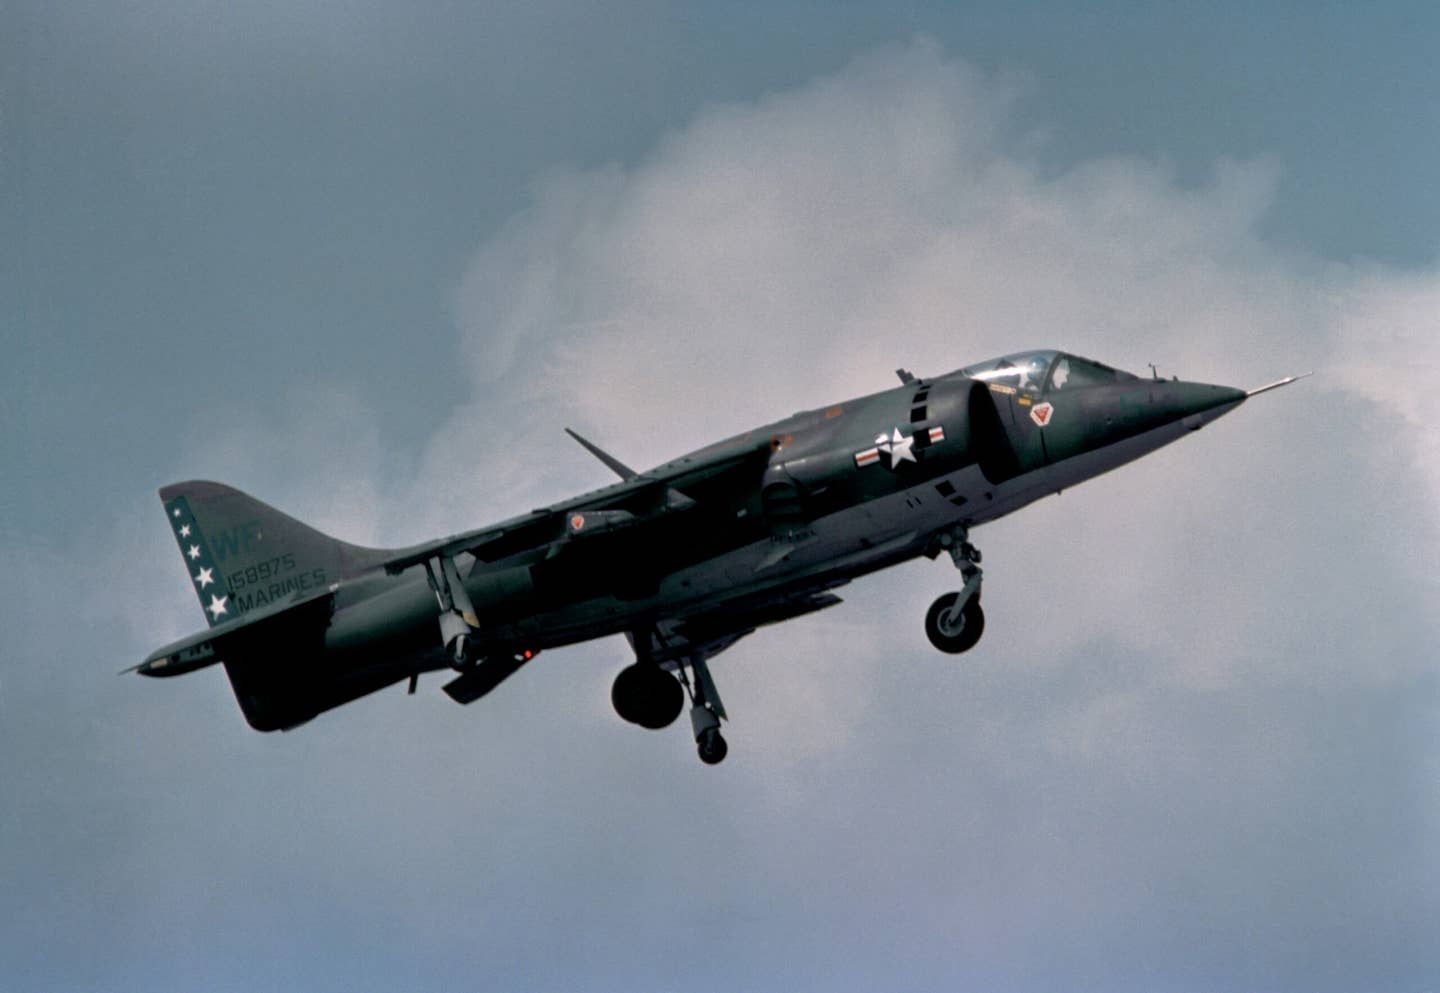 An AV-8A Harrier from Marine Attack Squadron 513 (VMA-513) preparing to land, with its nozzles deflected fully downward. U.S. Marine Corps pilots pioneered the VIFF maneuver. <em>National Archives</em>